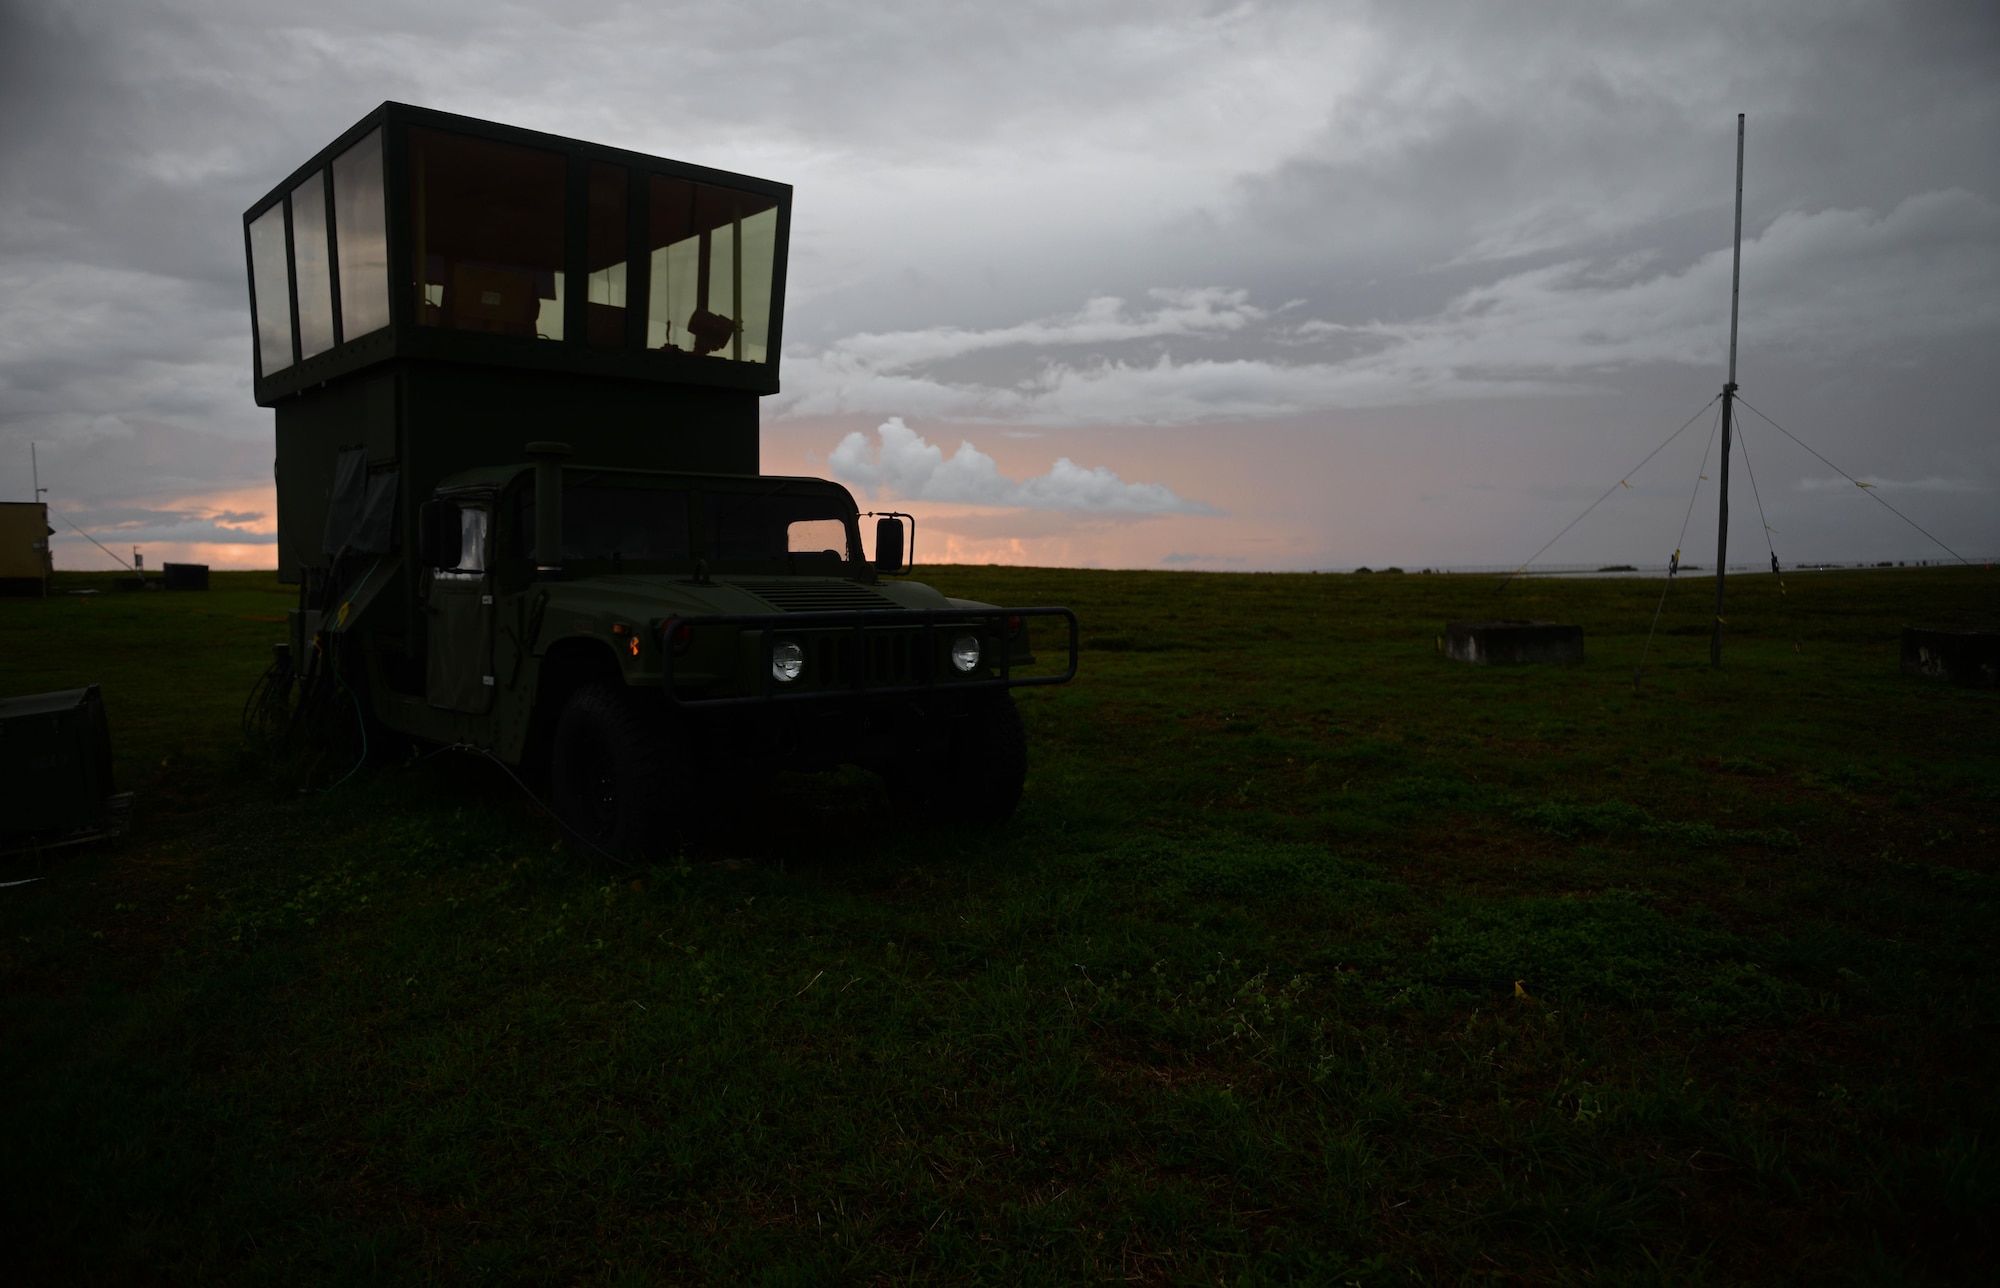 The sun rises behind an MSN-7 mobile control tower parked on the flightline June 20, 2017, at Andersen Air Force Base, Guam. Air traffic control Airmen assigned to the 36th Operation Support Squadron began work in the new tower cab here June 30 after spending almost three months working in the mobile tower unit on the flightline. (U.S. Air Force photo by Senior Airman Alexa Ann Henderson) 